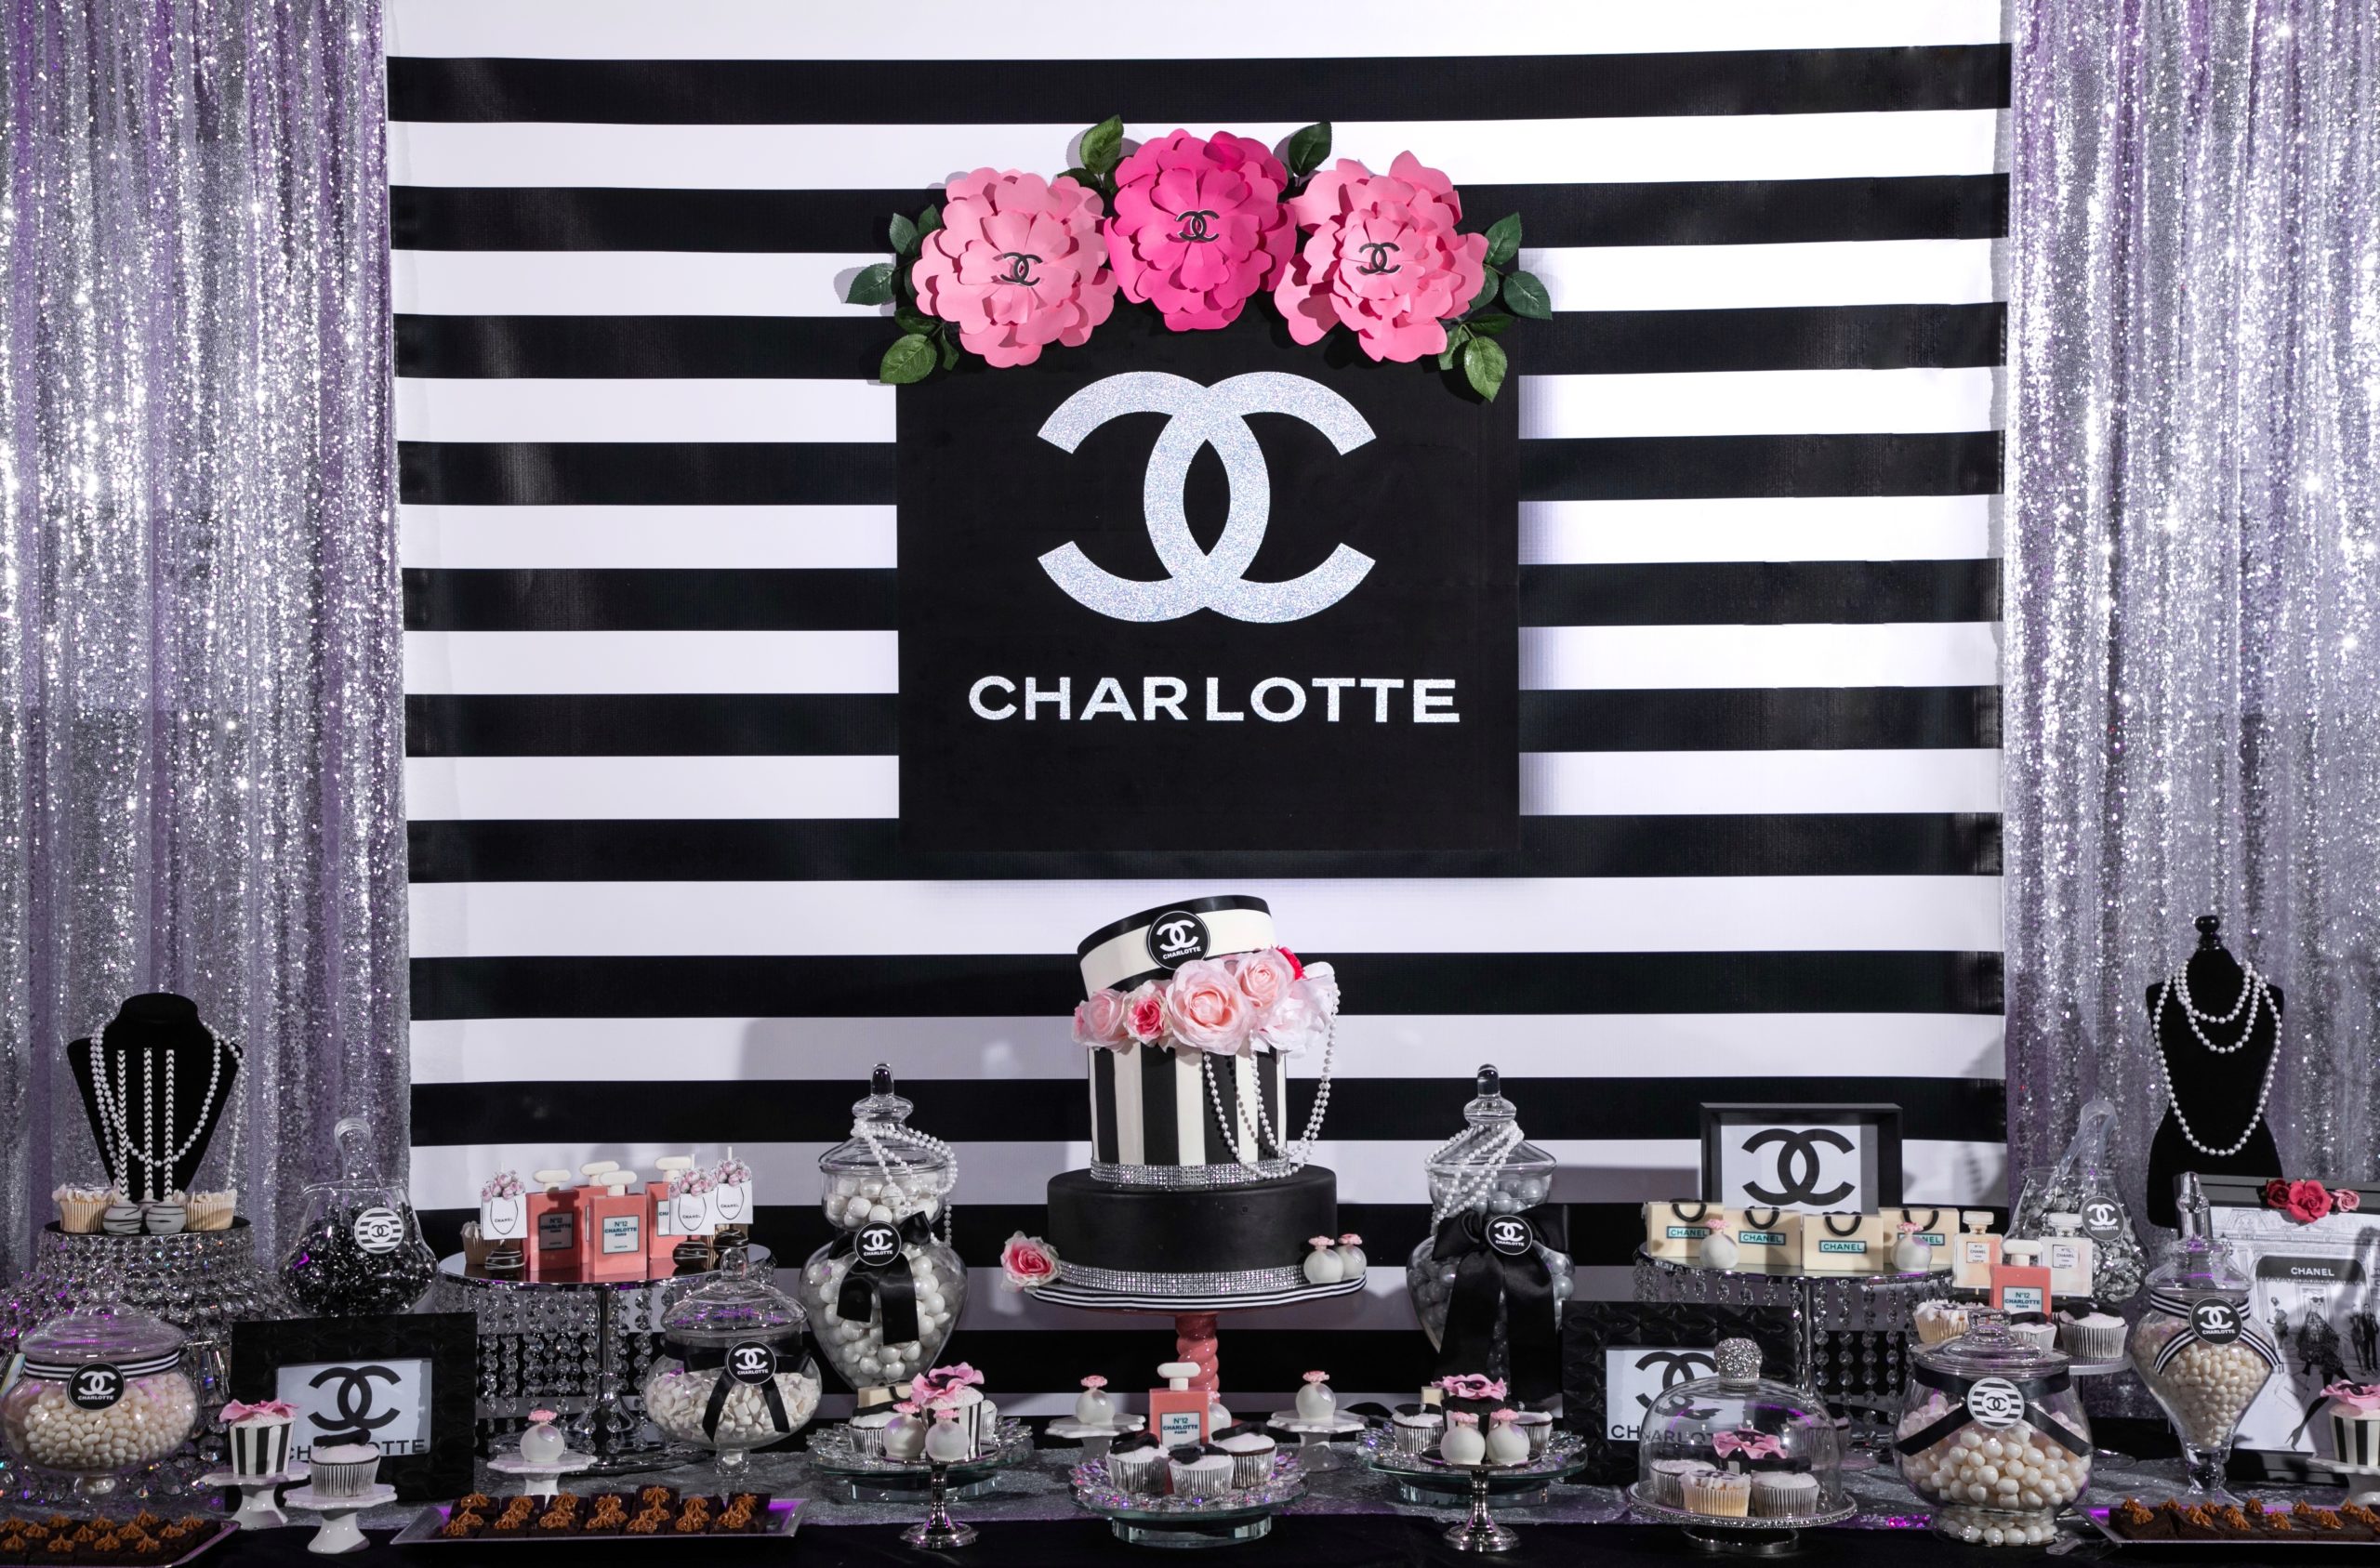 Chanel Party Decorations 